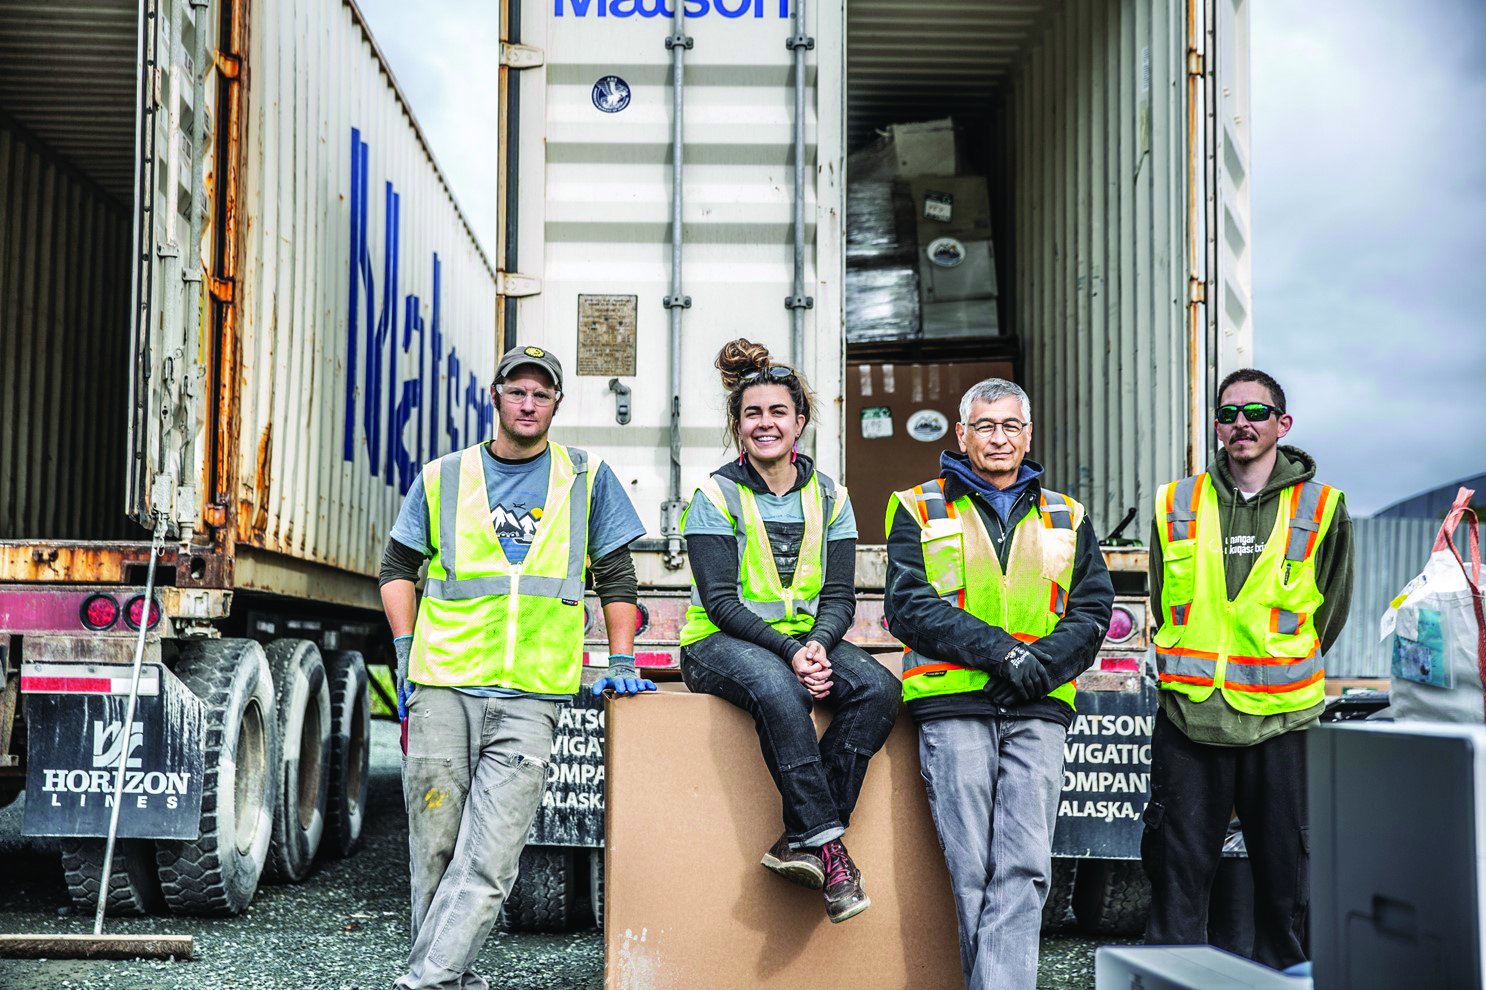 Four Backhaul stafff and volunteers wearing yellow safety vests pose in front of a Matson container loaded with e-waste.